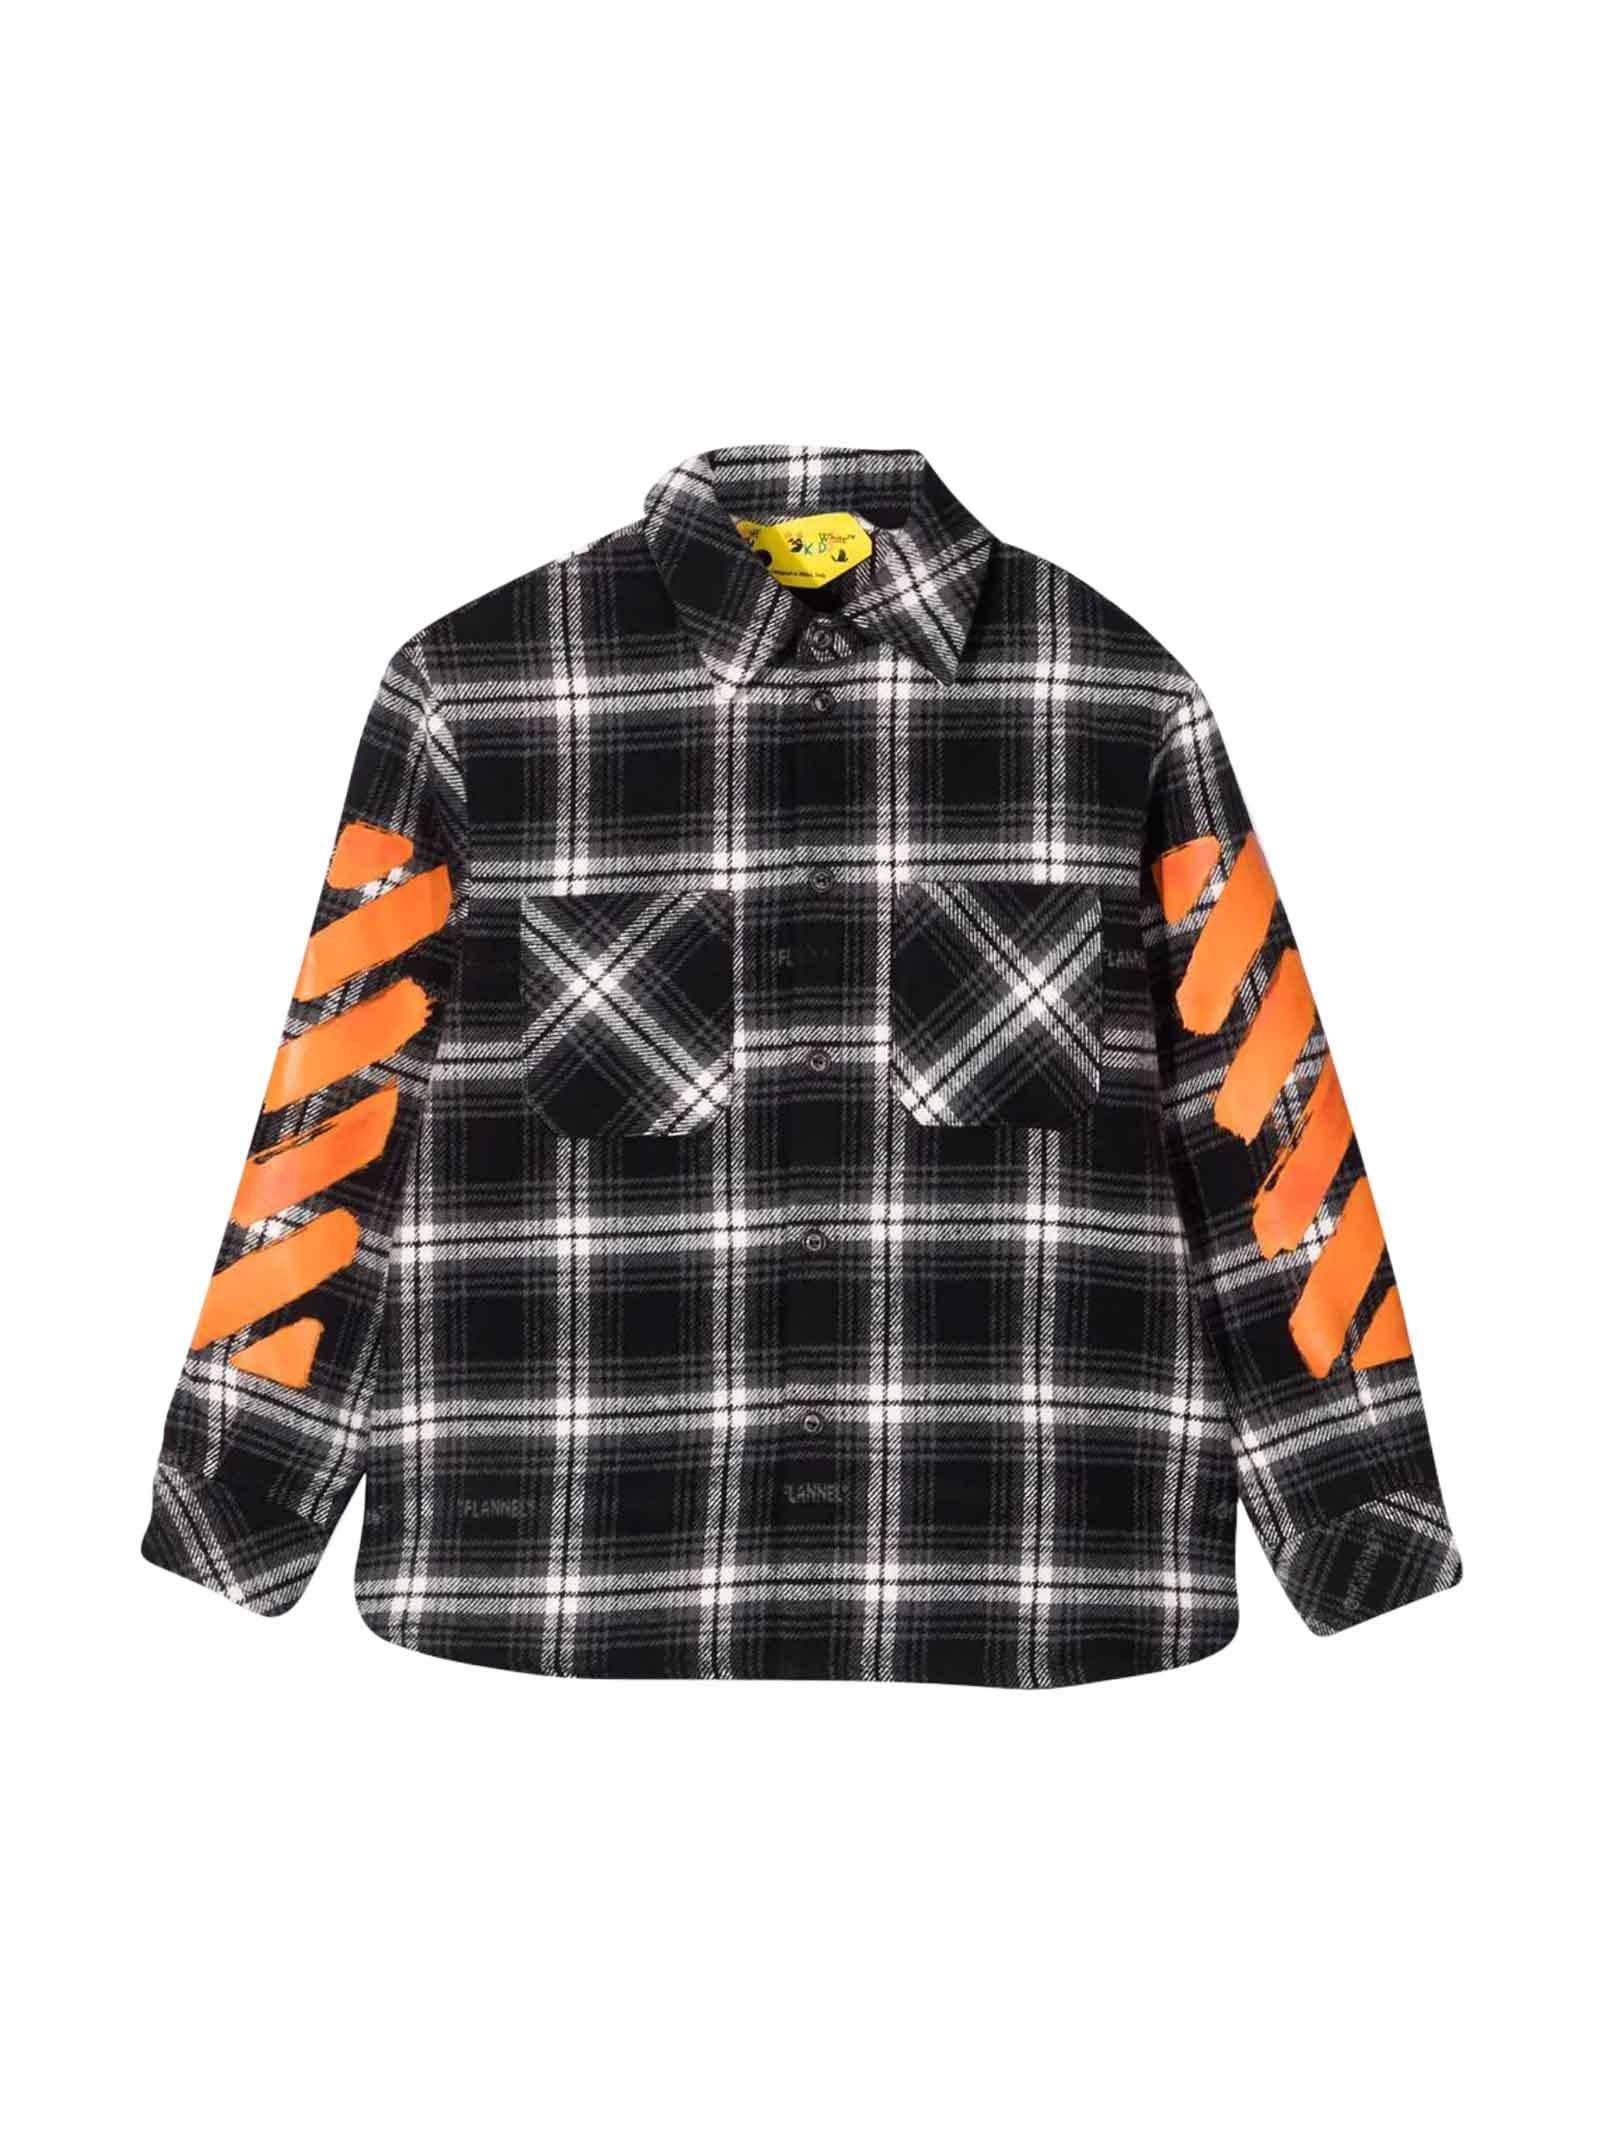 Off-White Shirt With White And Black Checked Print